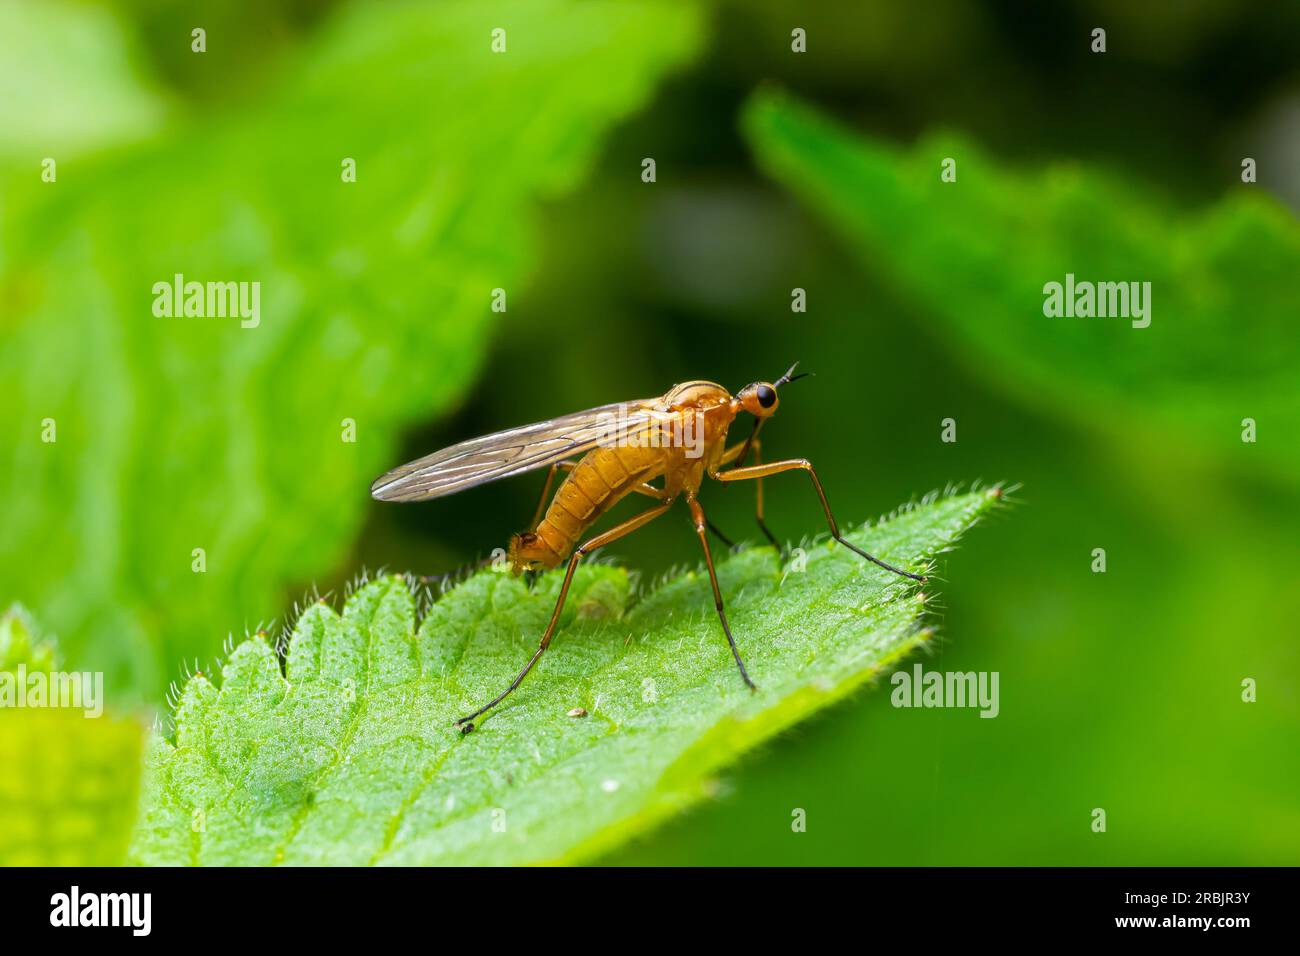 Yellow fly-scorpion on a blade of grass in a natural environment, forest, summer sunlight. Stock Photo